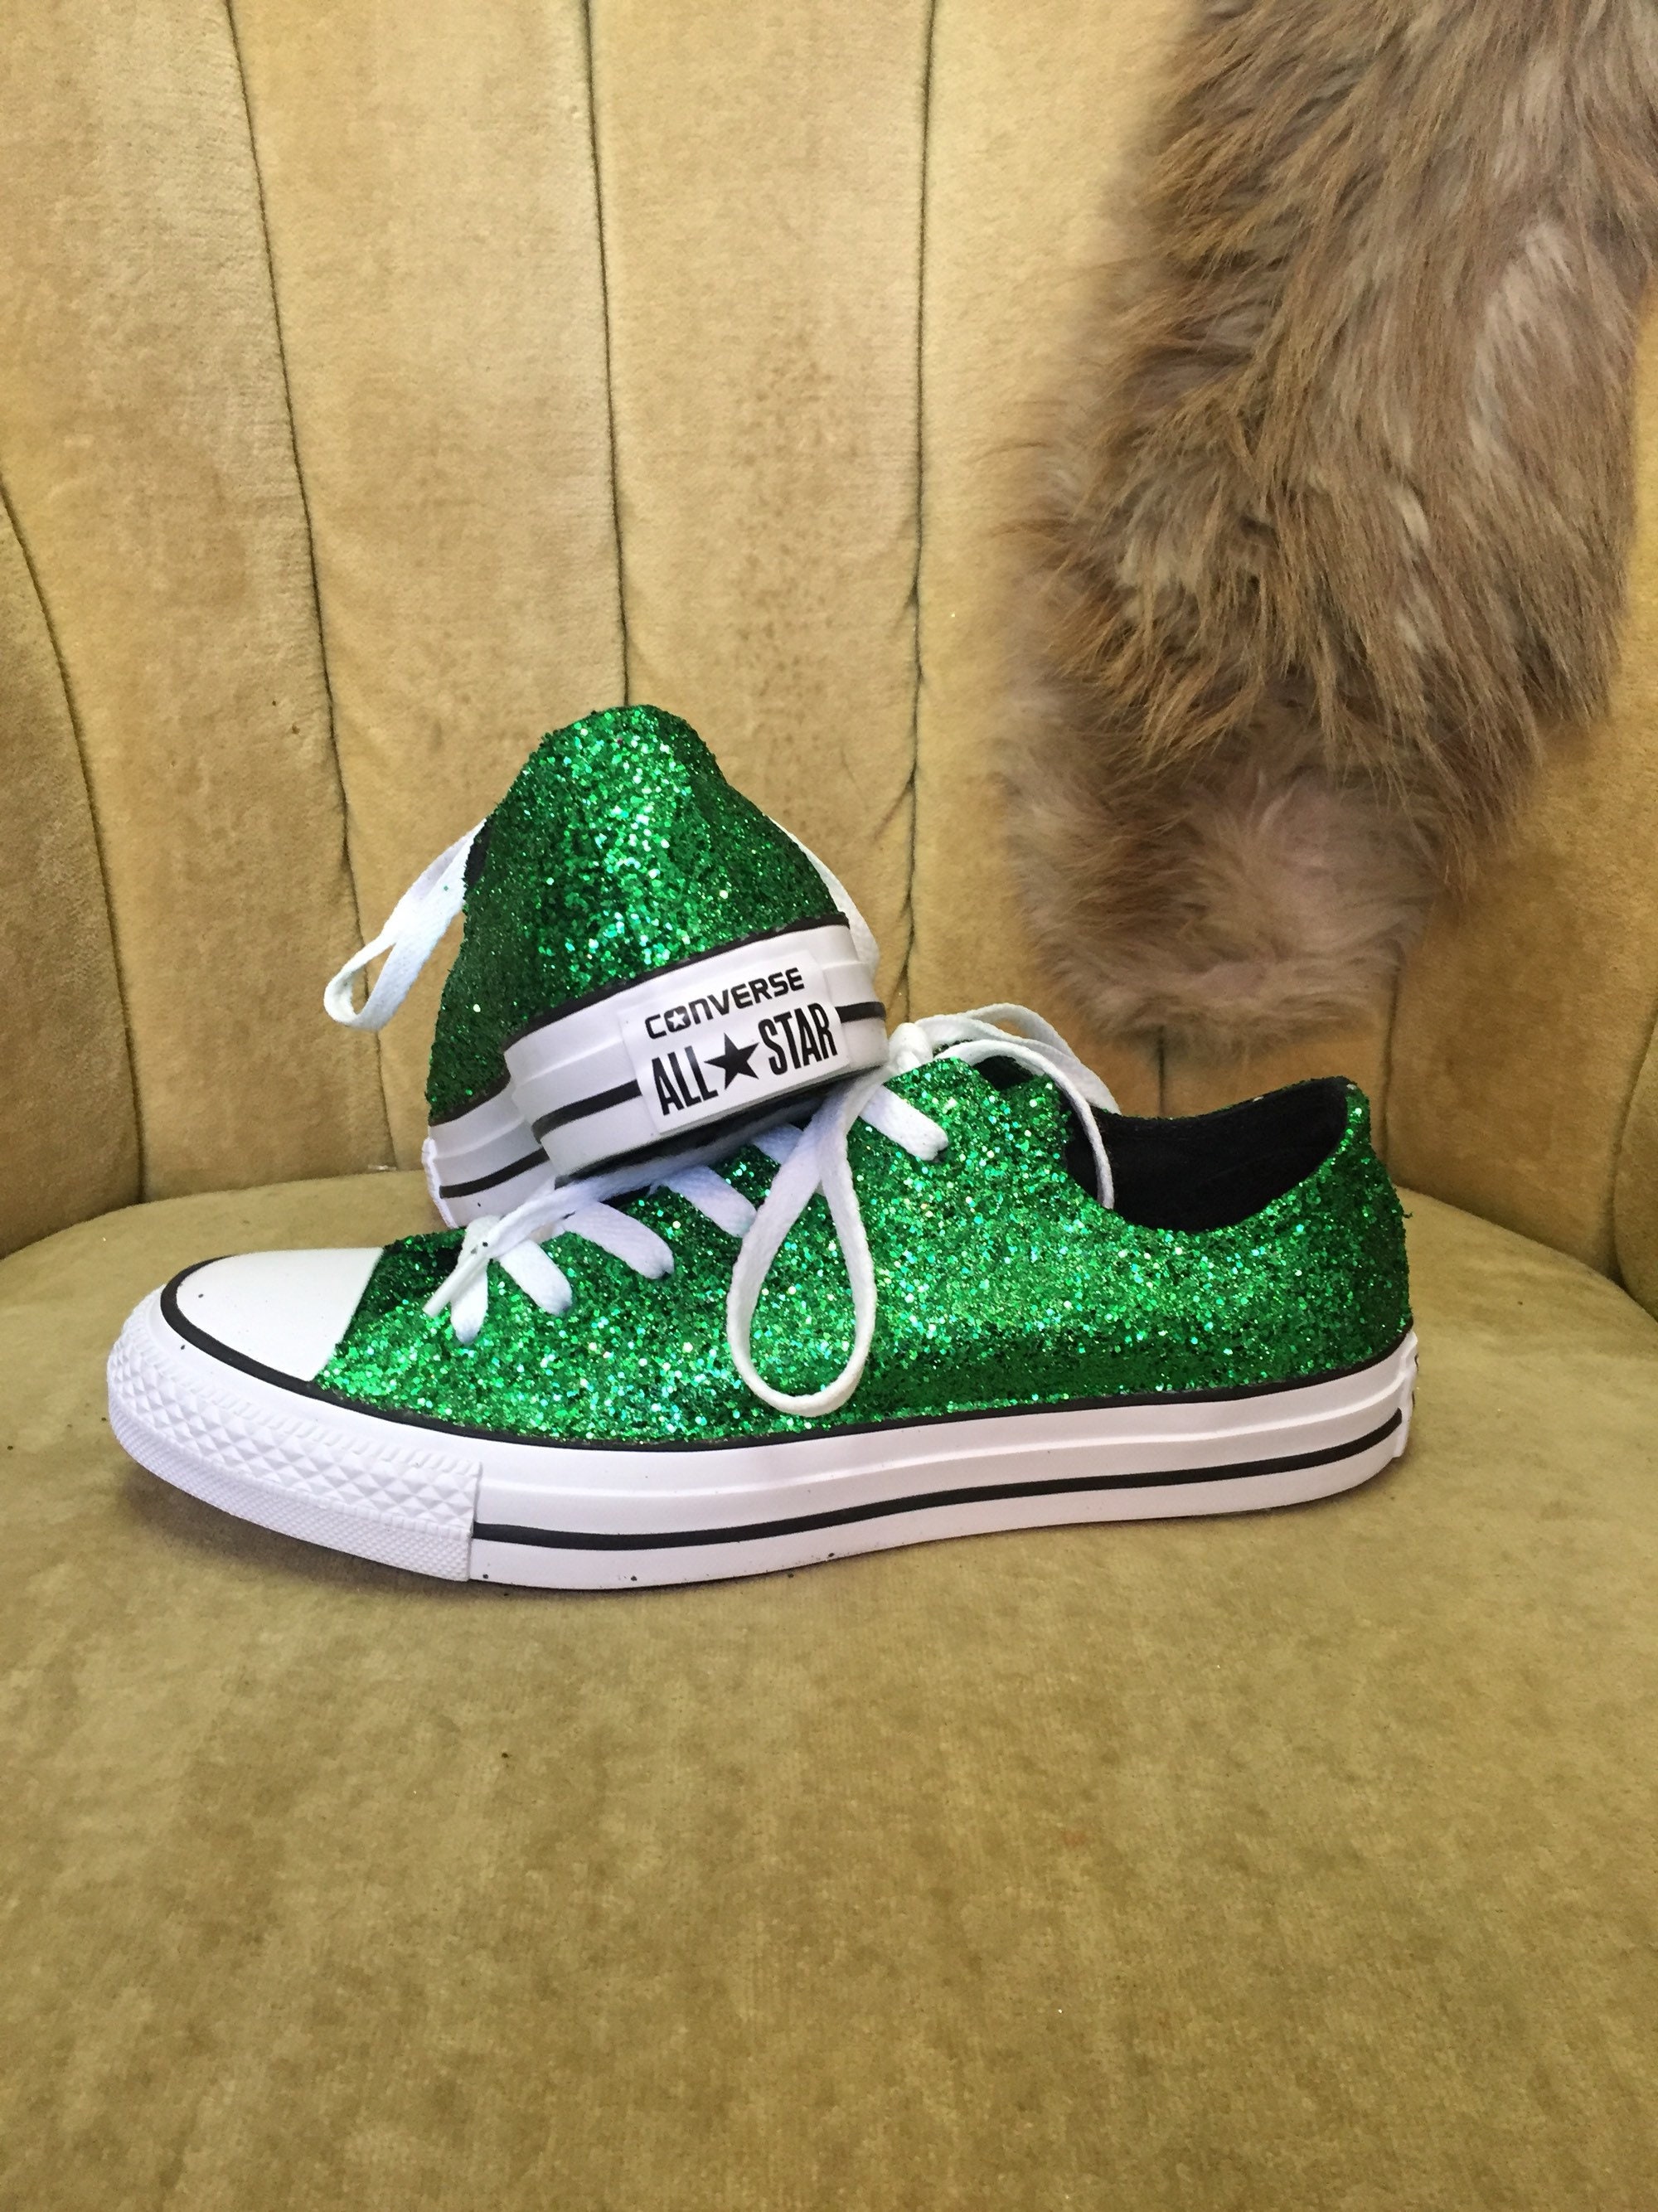 Authentic Converse All Stars in Glitter - Etsy